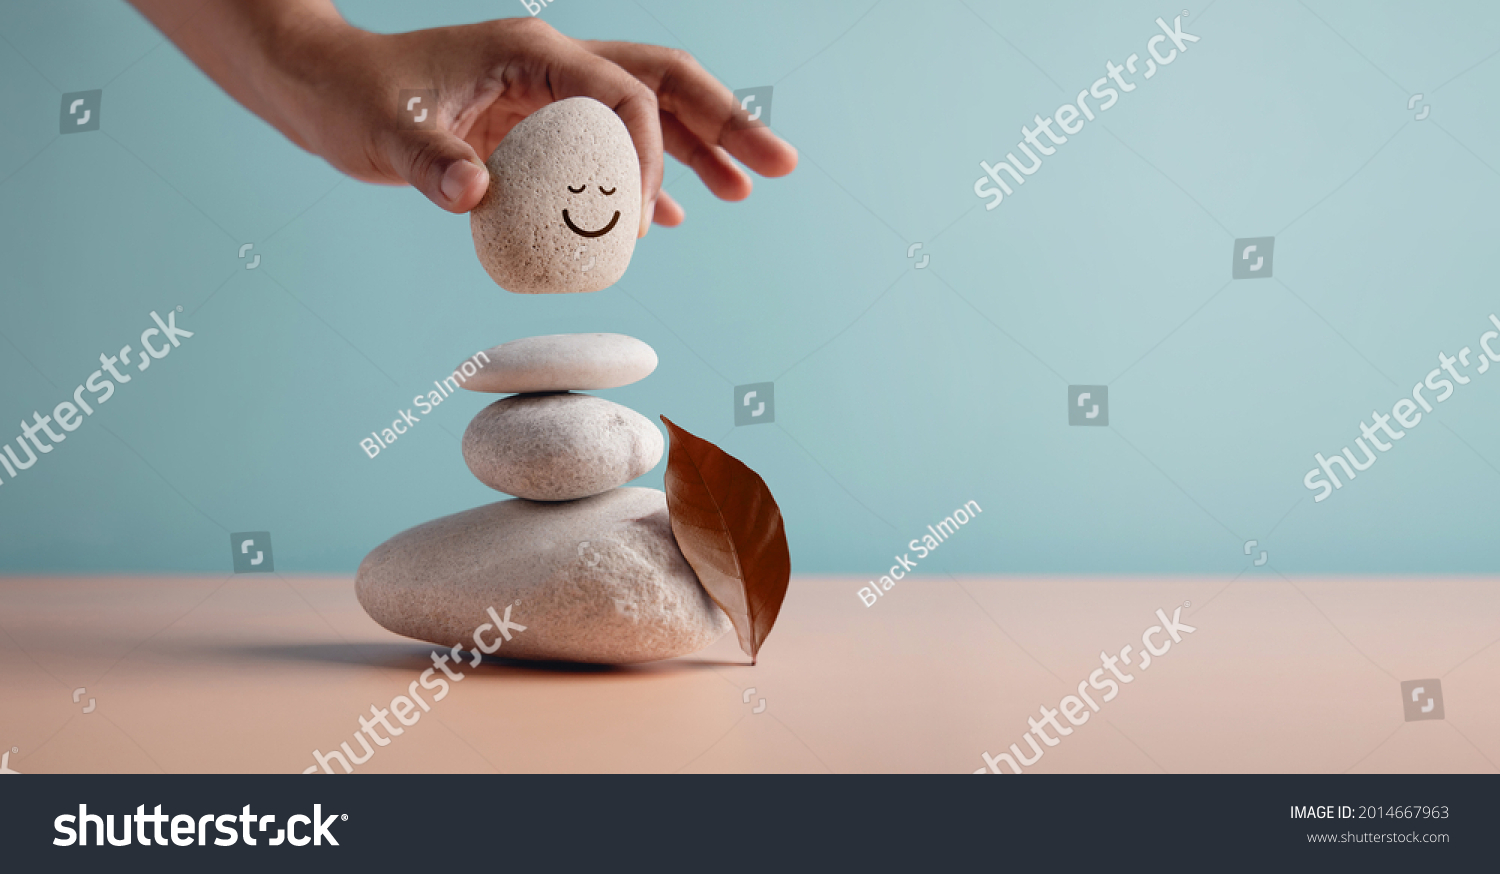 Enjoying Life Concept. Harmony and Positive Mind. Hand Setting Natural Pebble Stone with Smiling Face Cartoon to Balance. Balancing Body, Mind, Soul and Spirit. Mental Health Practice #2014667963